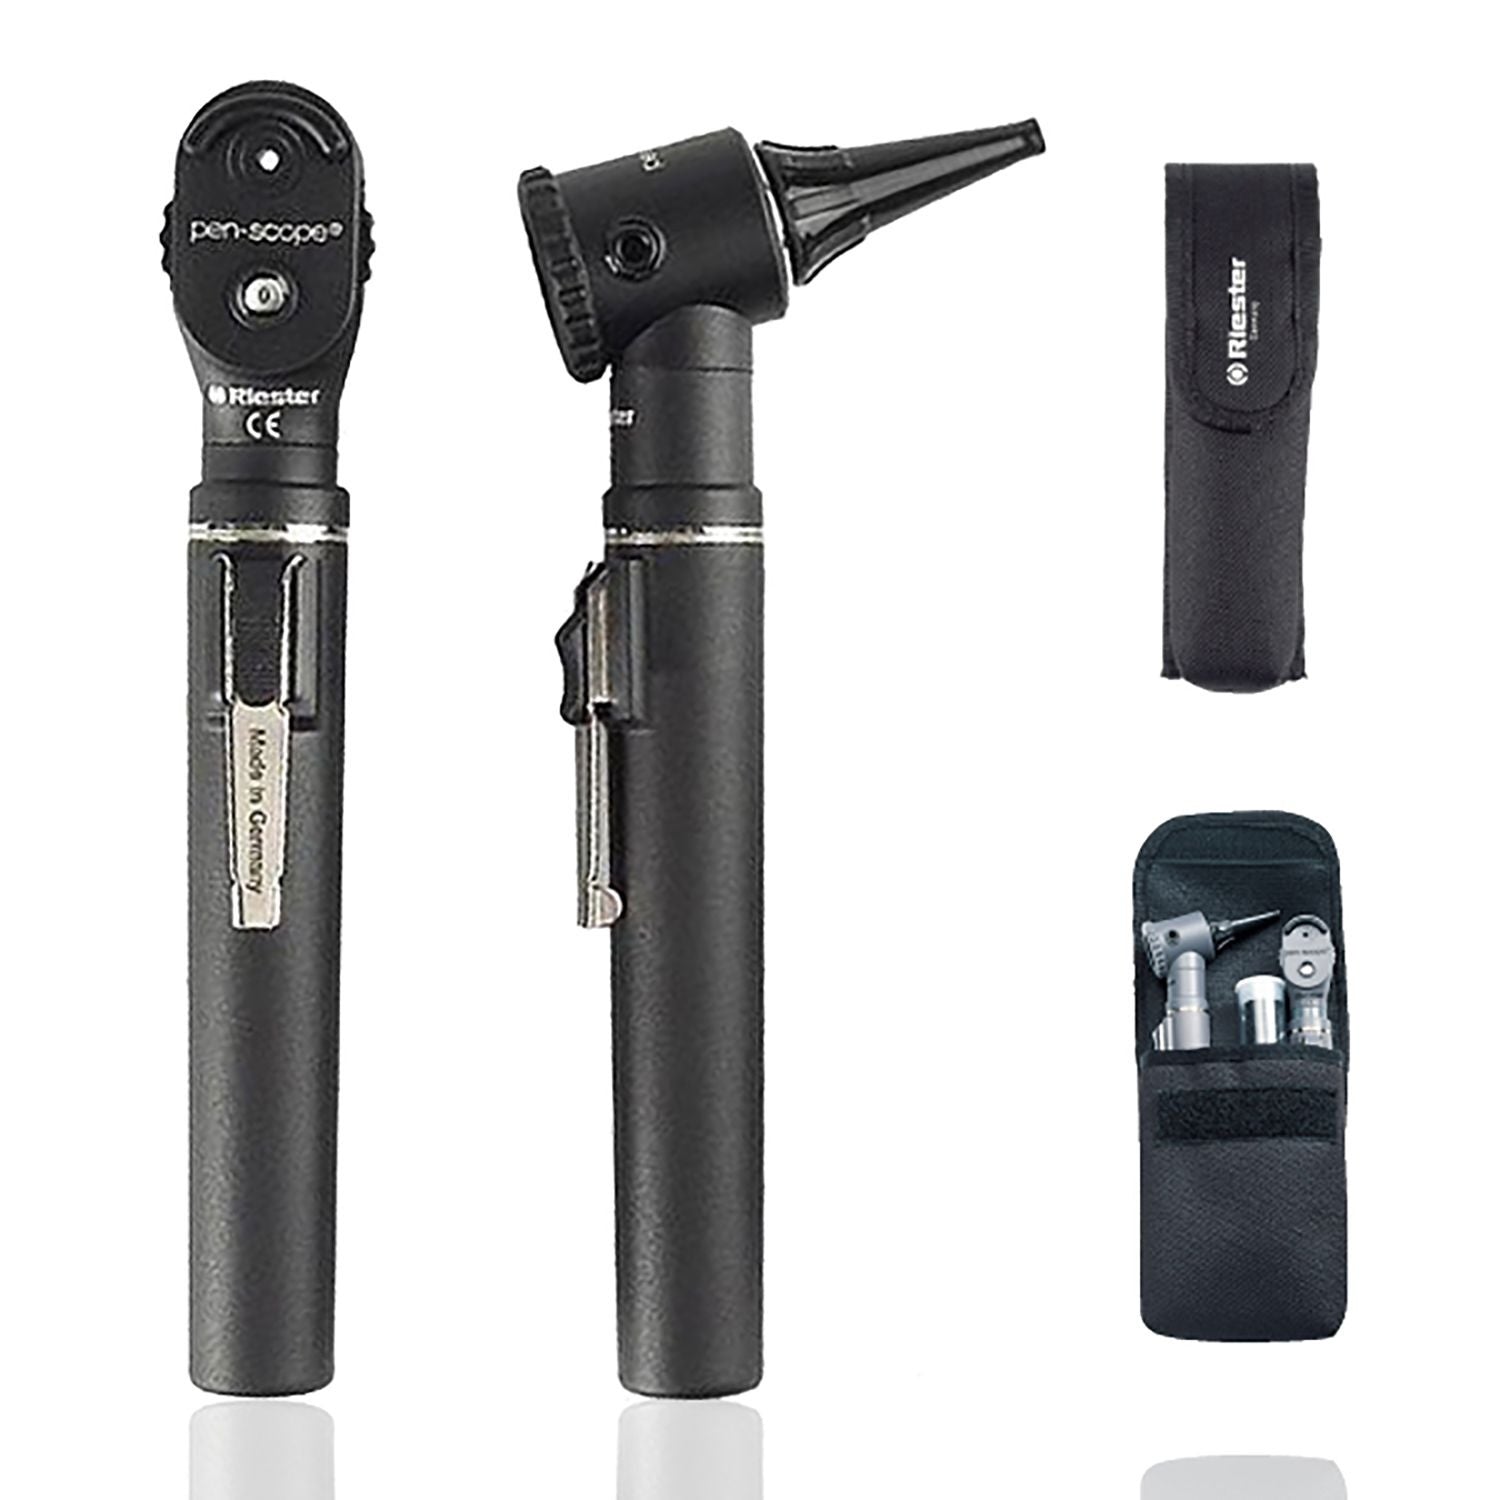 Riester Penscope Otoscope / Ophthalmoscope Set | 2.7V with Pouch | Black